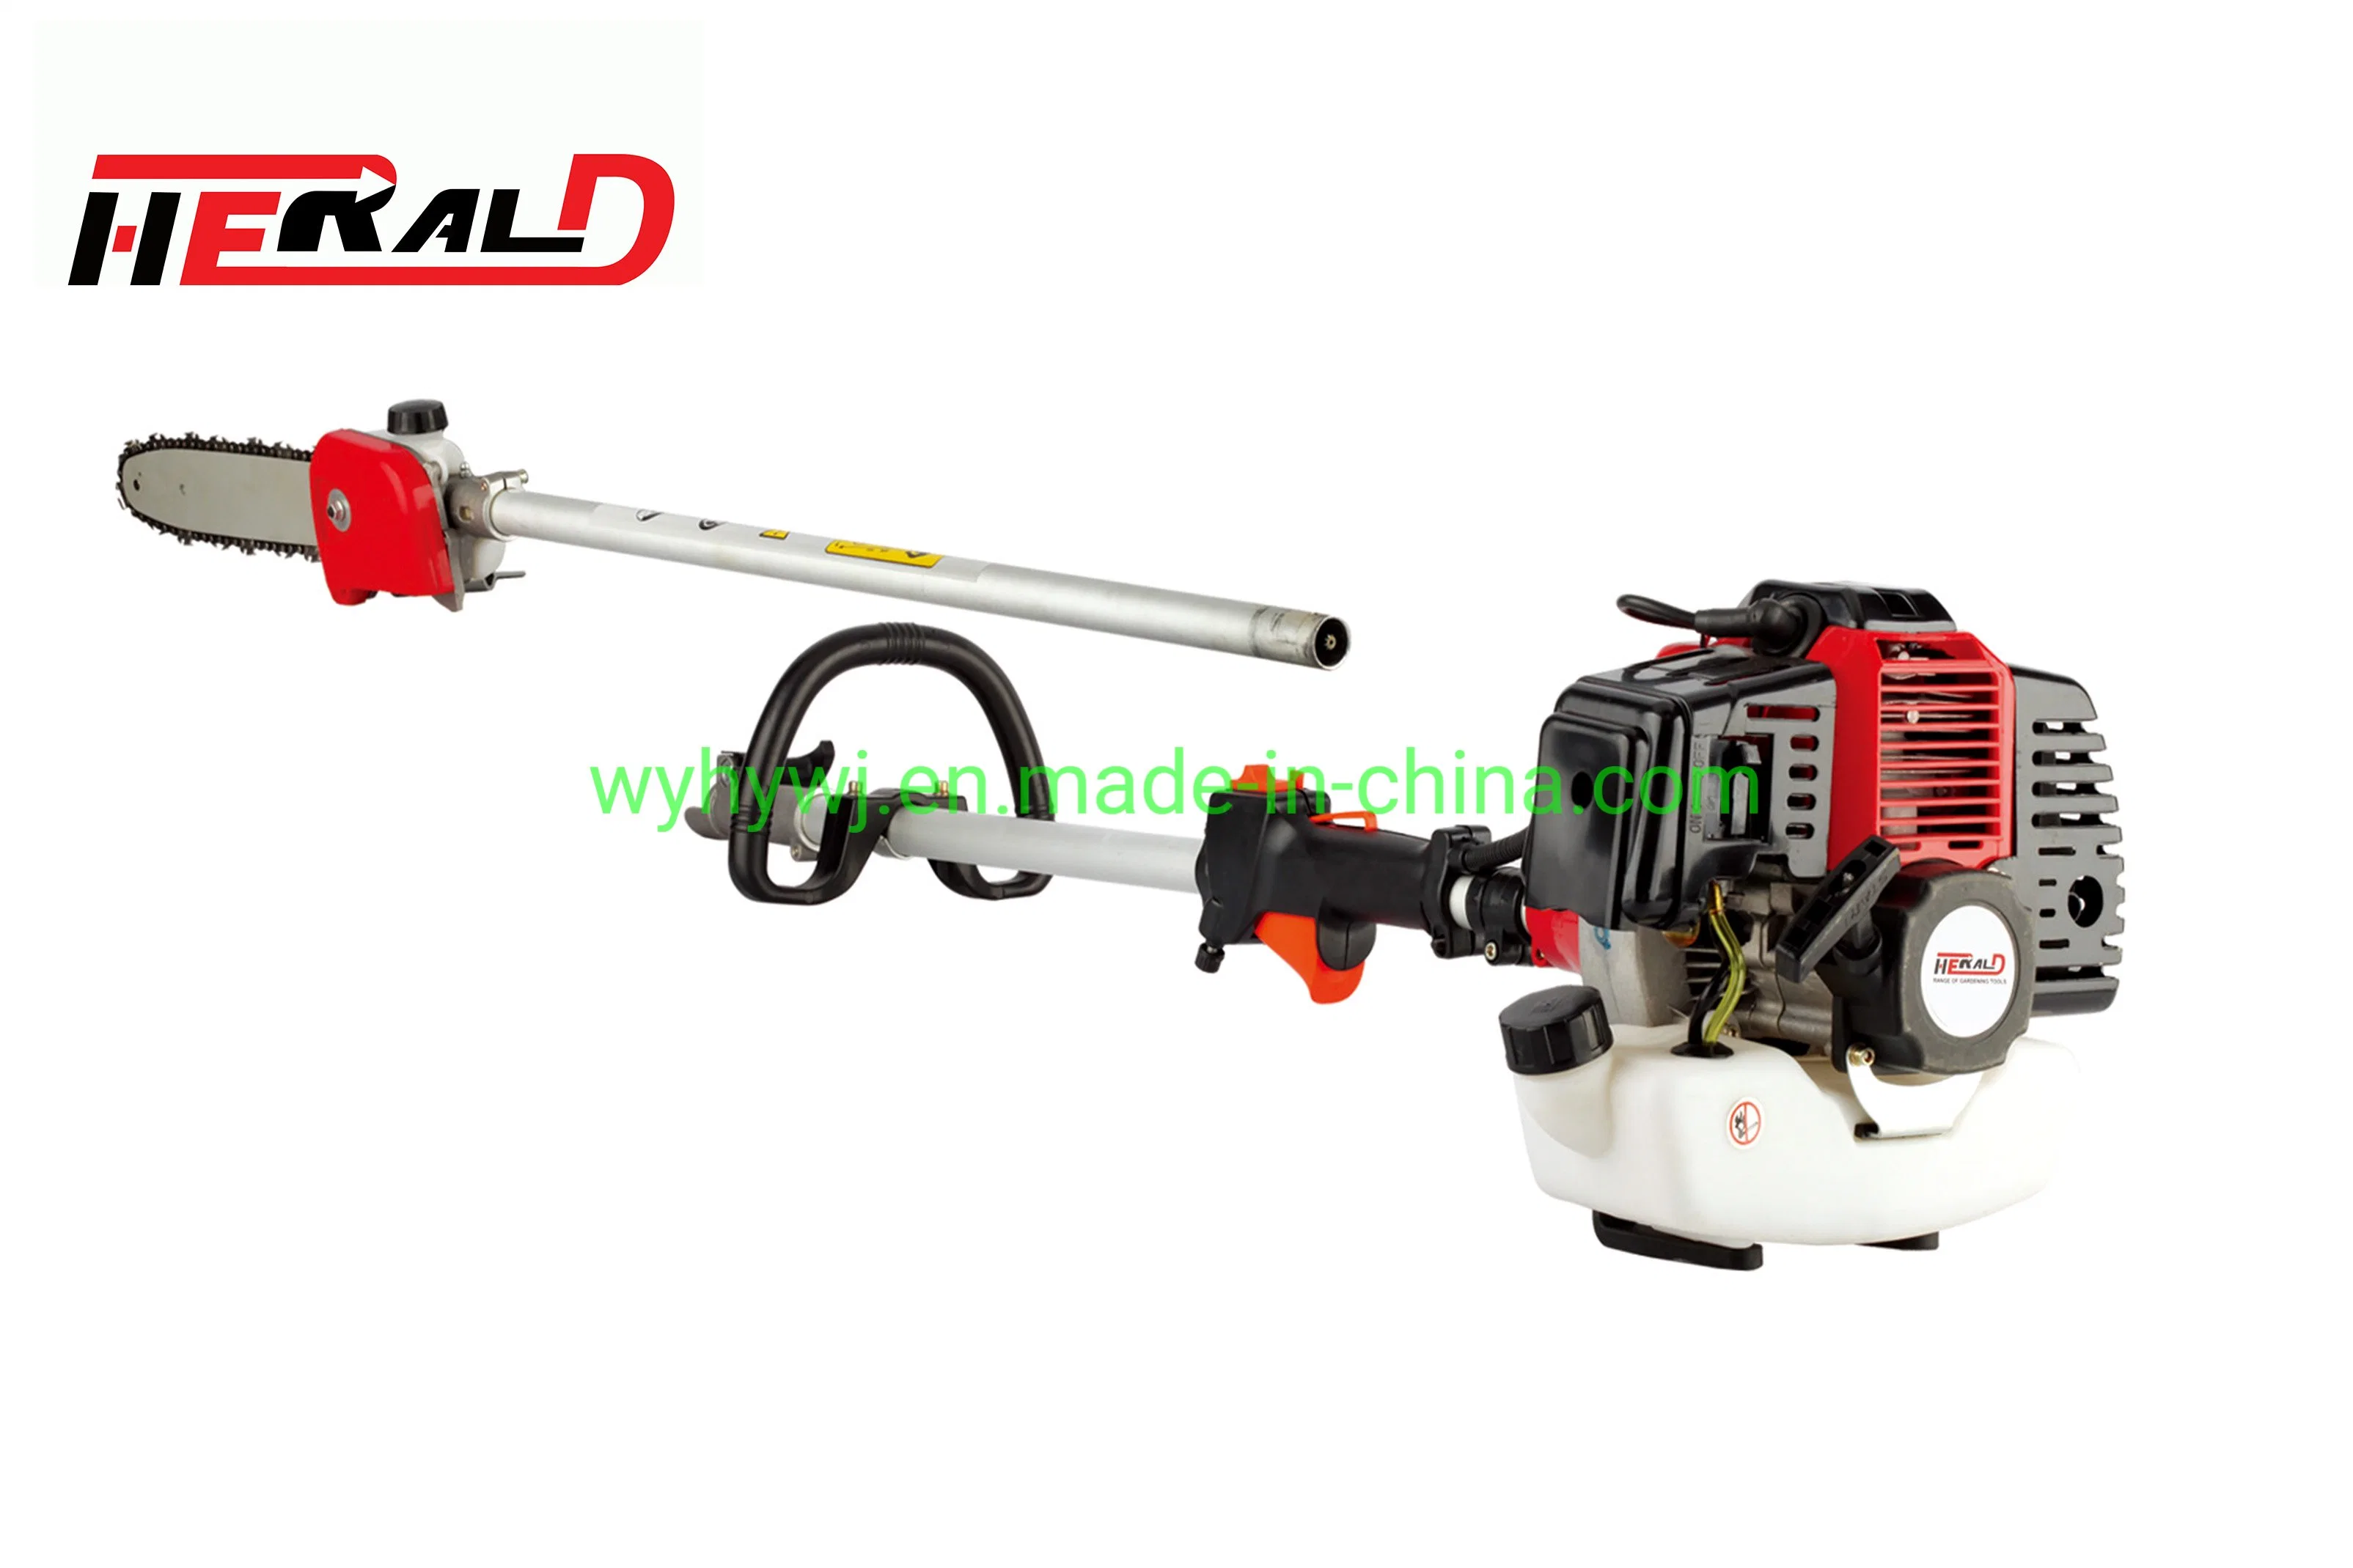 4 in 1 Multifunction Brush Cutter Hy-325K Good Quality Low Price Gasoline Grass Trimmer